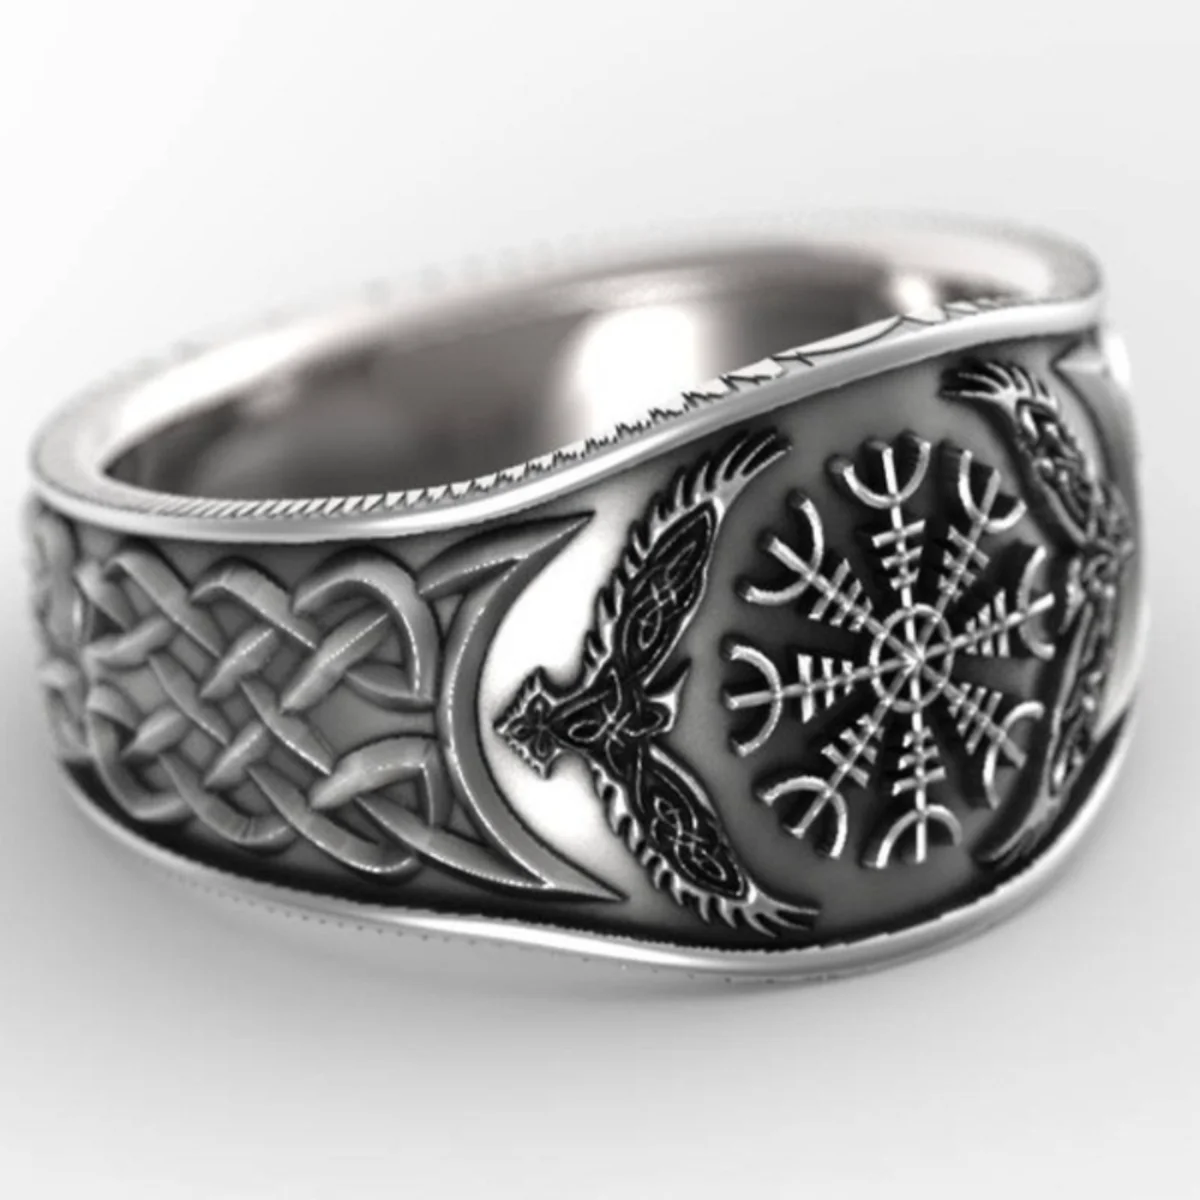 

2023Wish Hot Nordic Myth Story Celtic Wolf Man Ring Retro Compass Ring Ancient Silver Ring Jewelry Wholesale Global Lowest Price